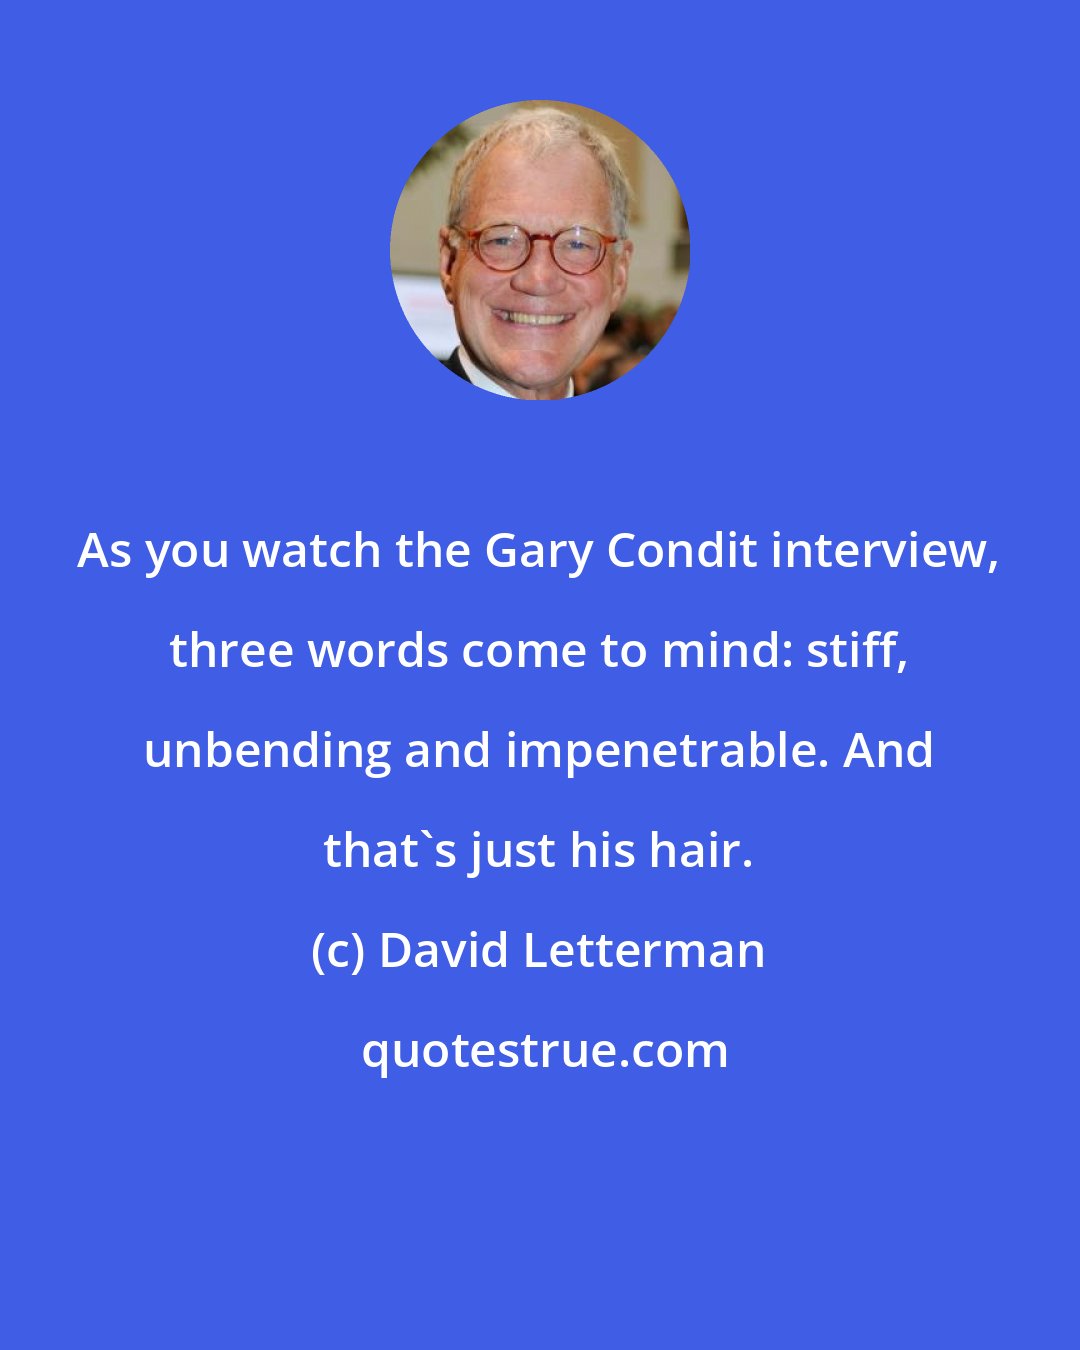 David Letterman: As you watch the Gary Condit interview, three words come to mind: stiff, unbending and impenetrable. And that's just his hair.